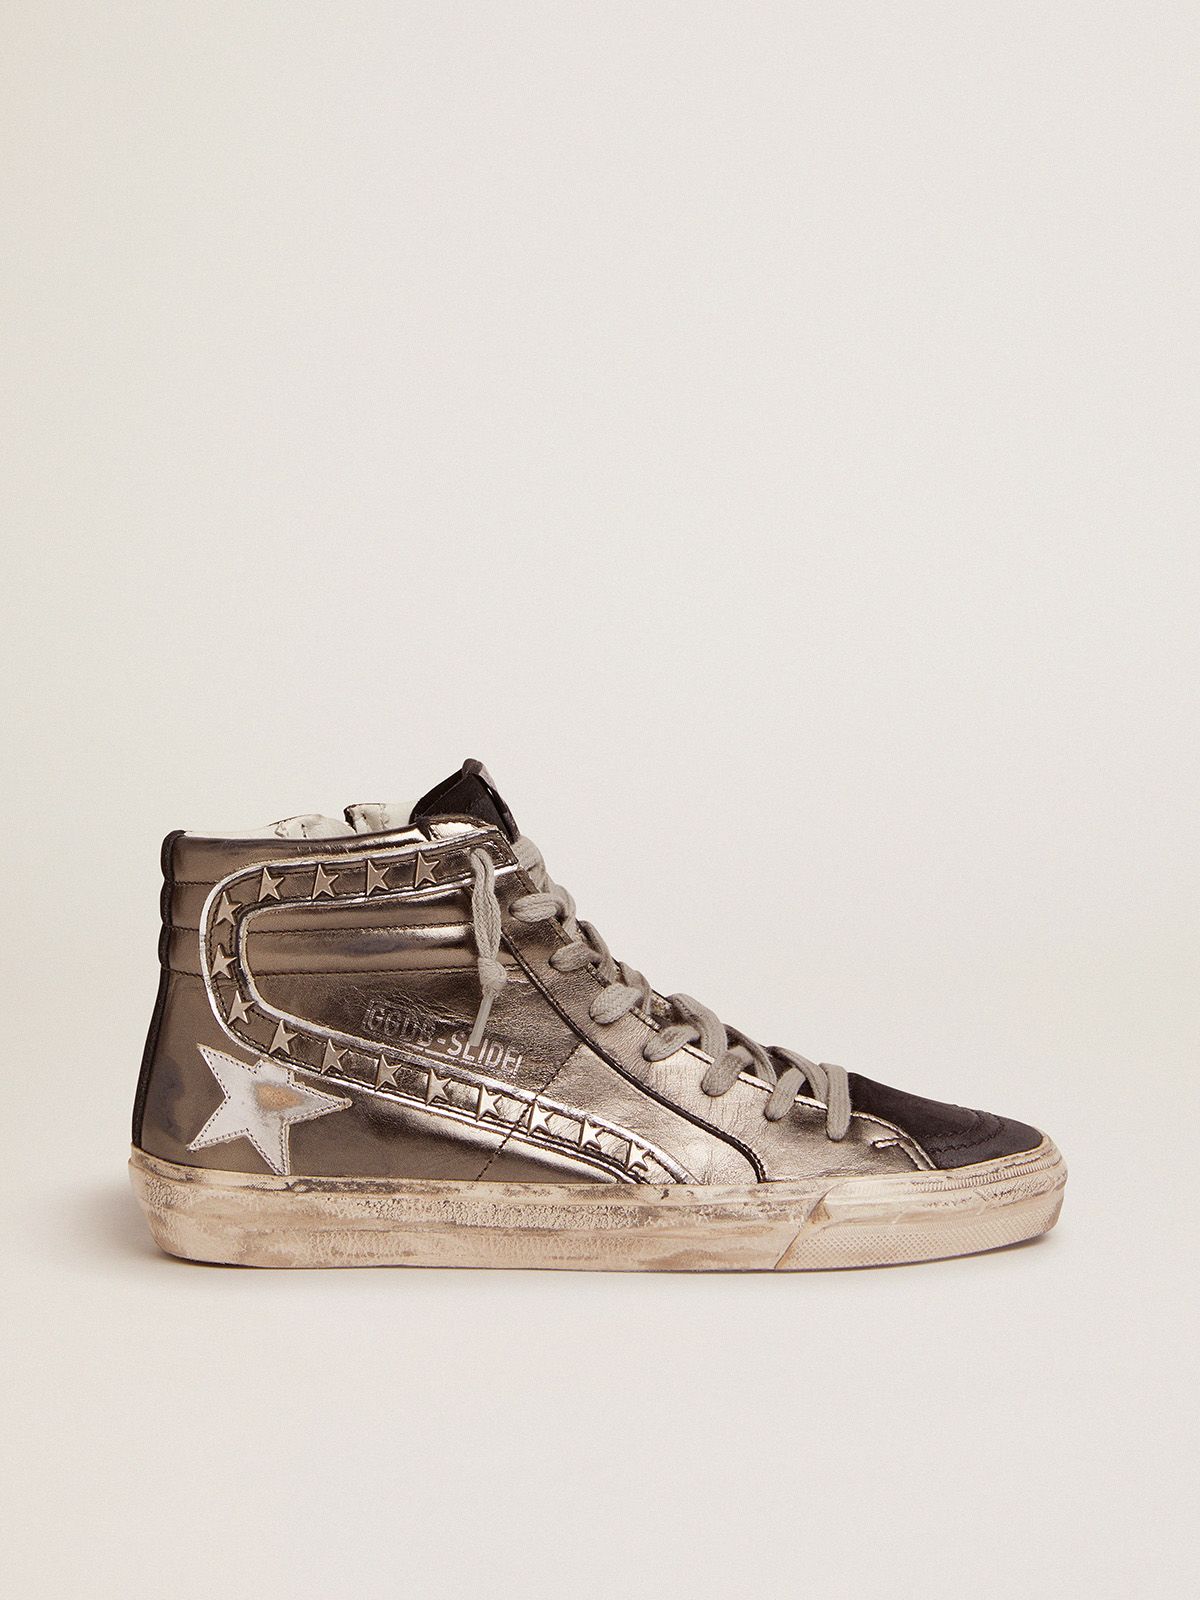 Golden Goose Bambina Slide sneakers with silver laminated leather upper and star-shaped studs